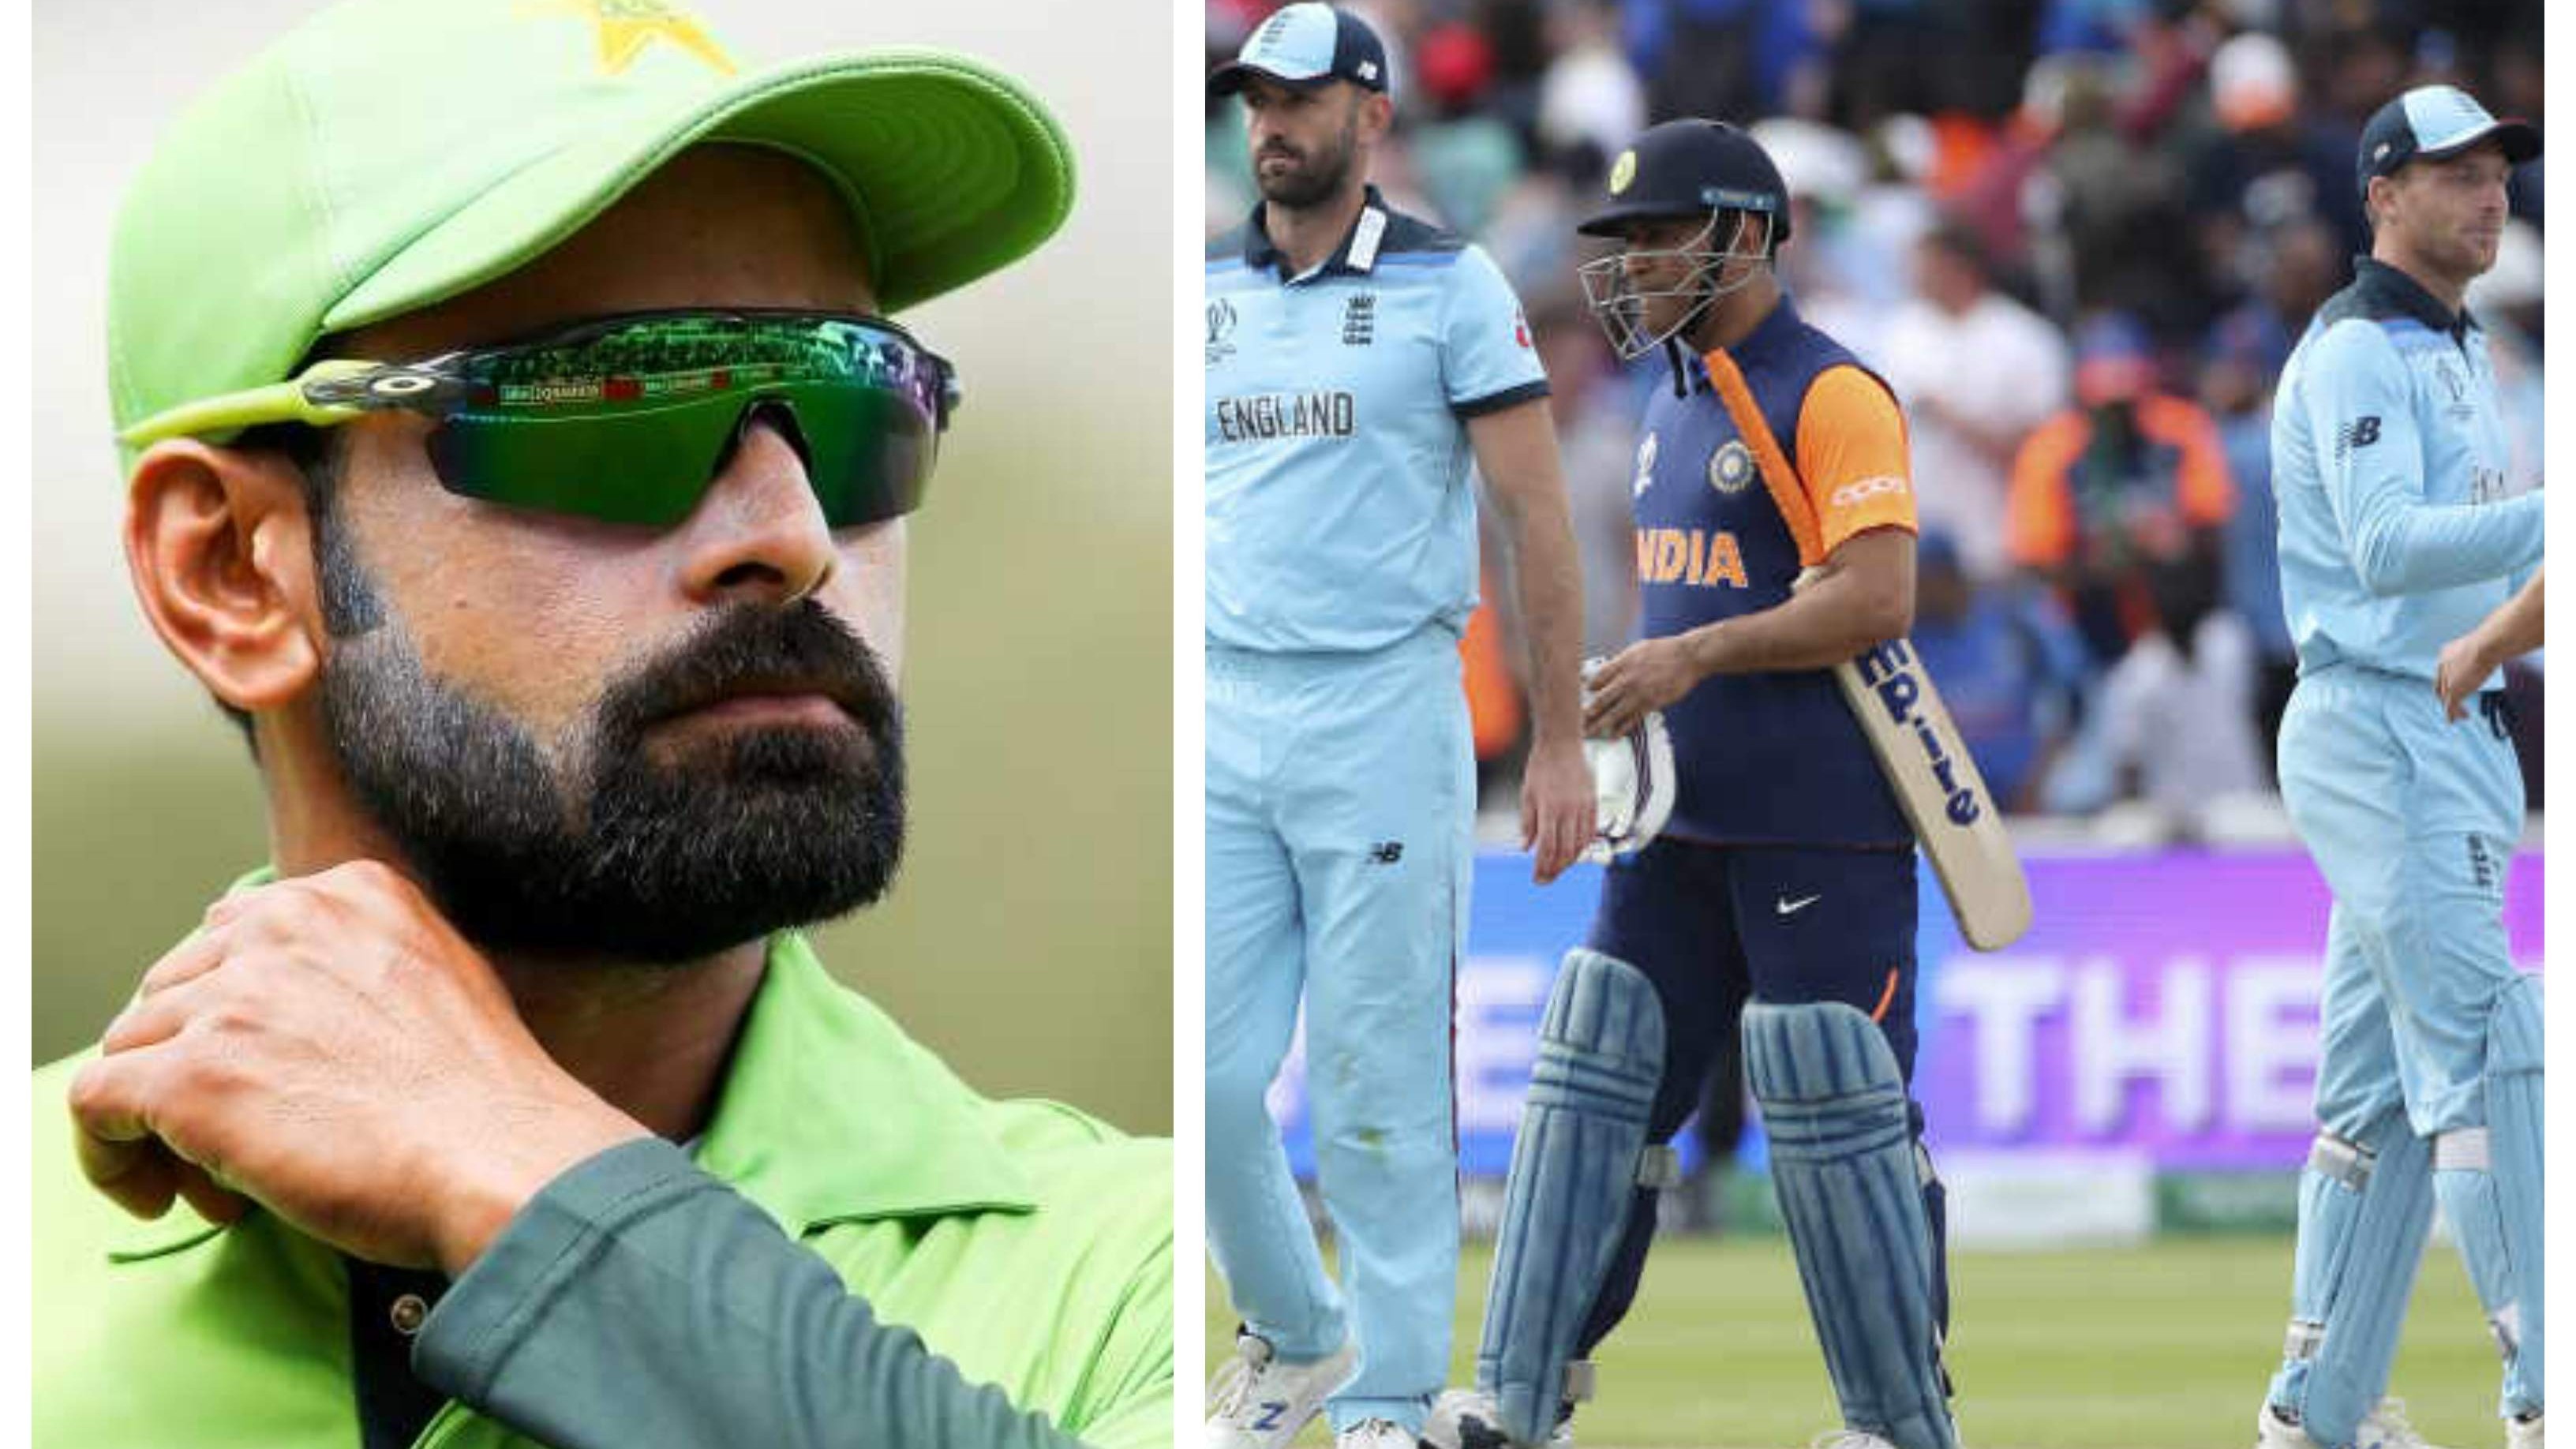 Mohammad Hafeez claims India lacked match-winning intent during World Cup 2019 game against England